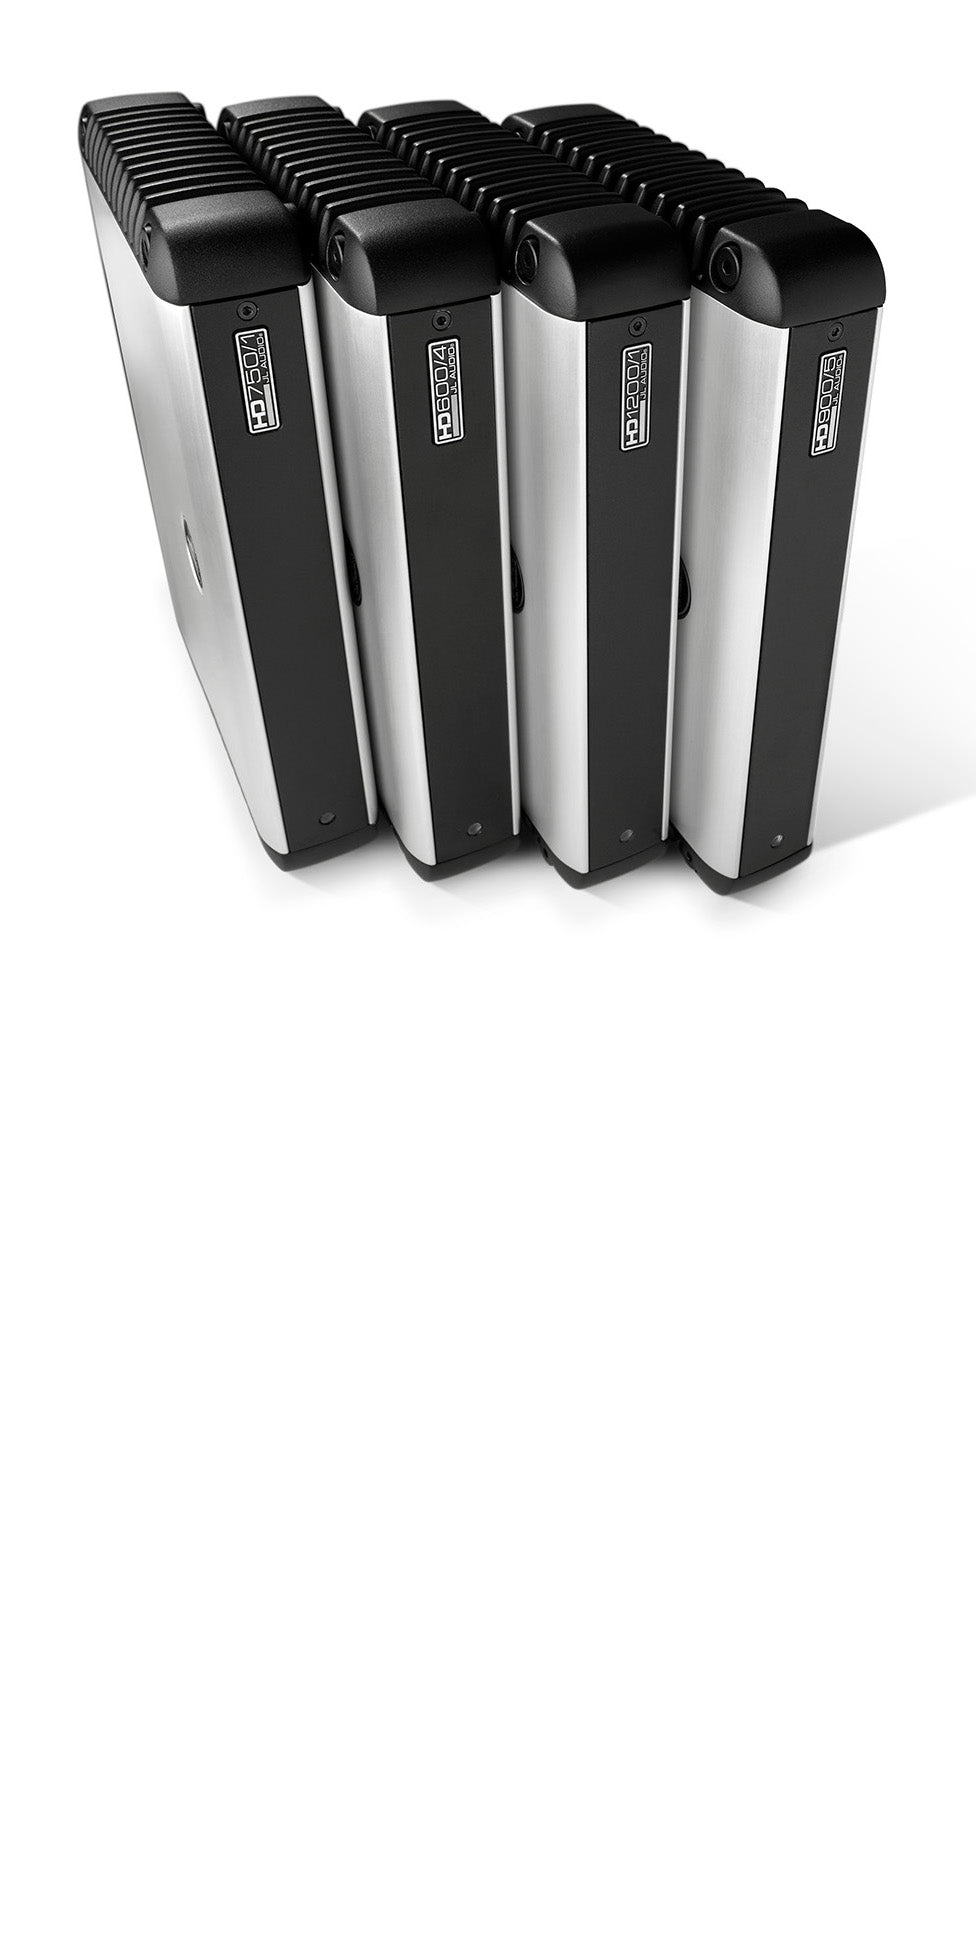 A series of 4 HD amps lined up vertically.